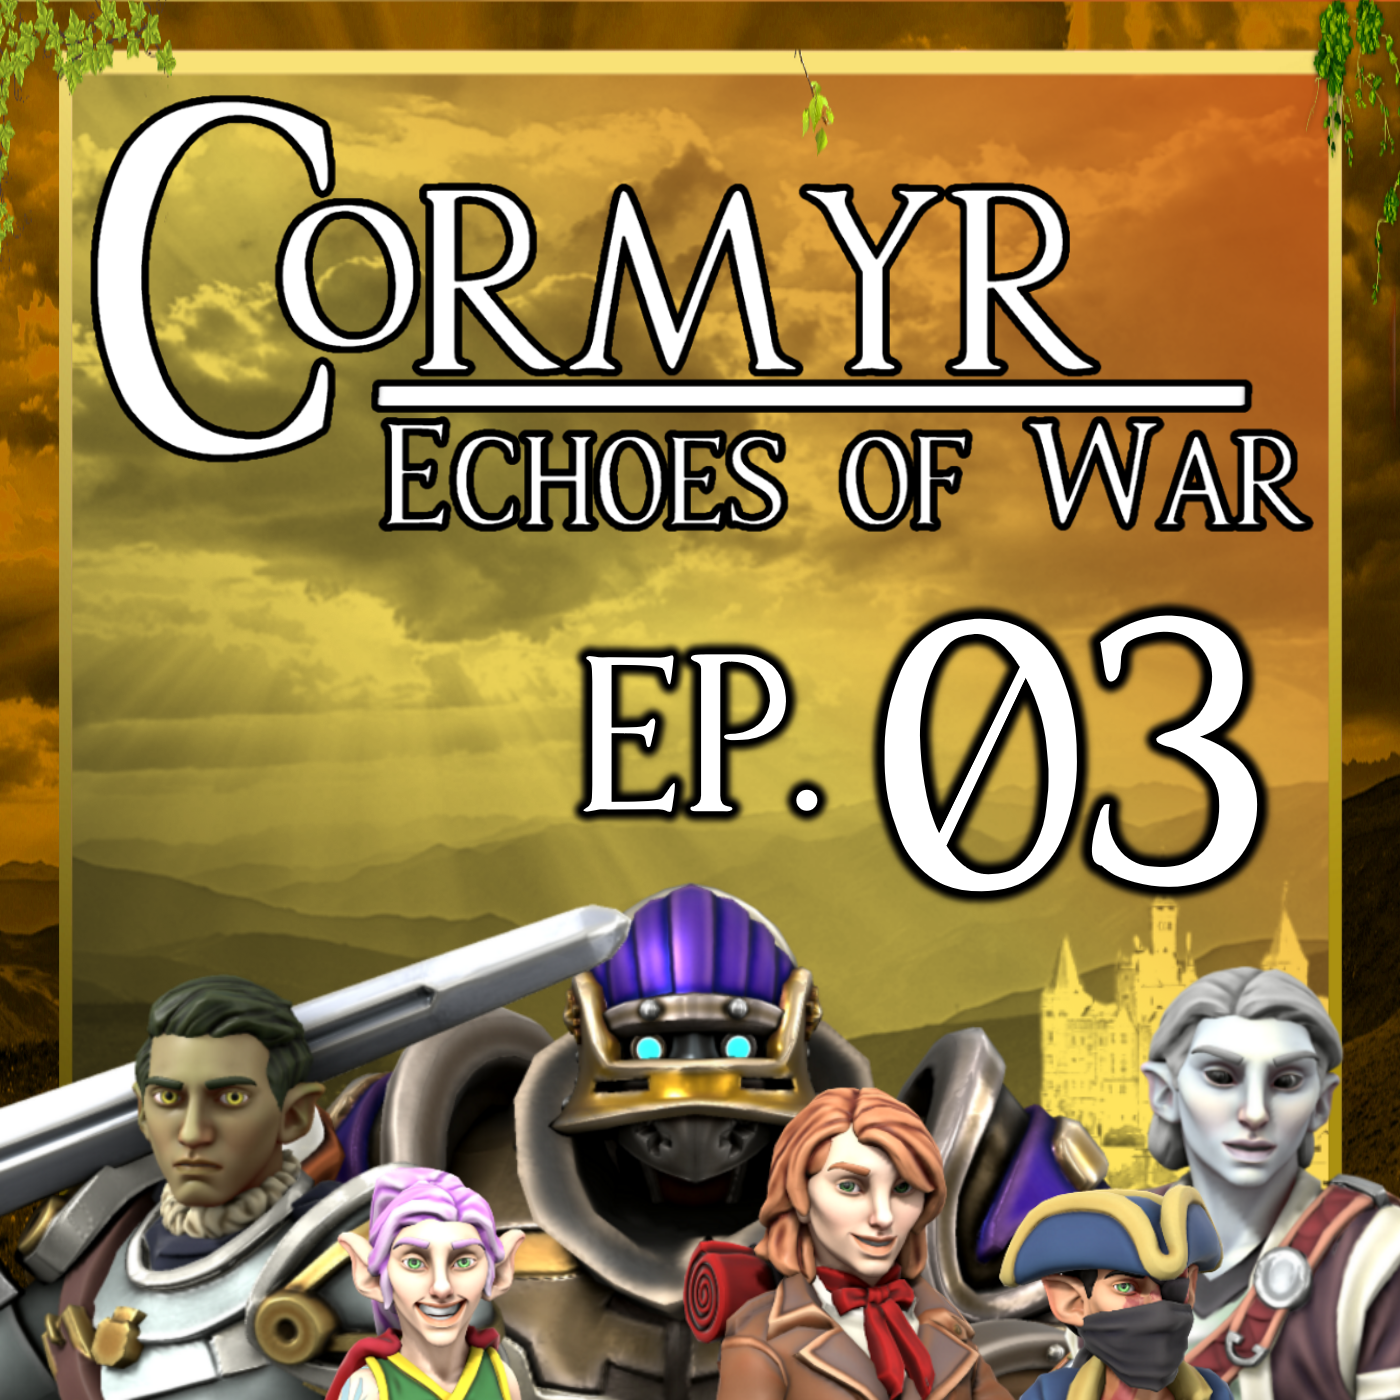 Cormyr: Echoes of War - Ep. 3 - Friends, Forests, Foes